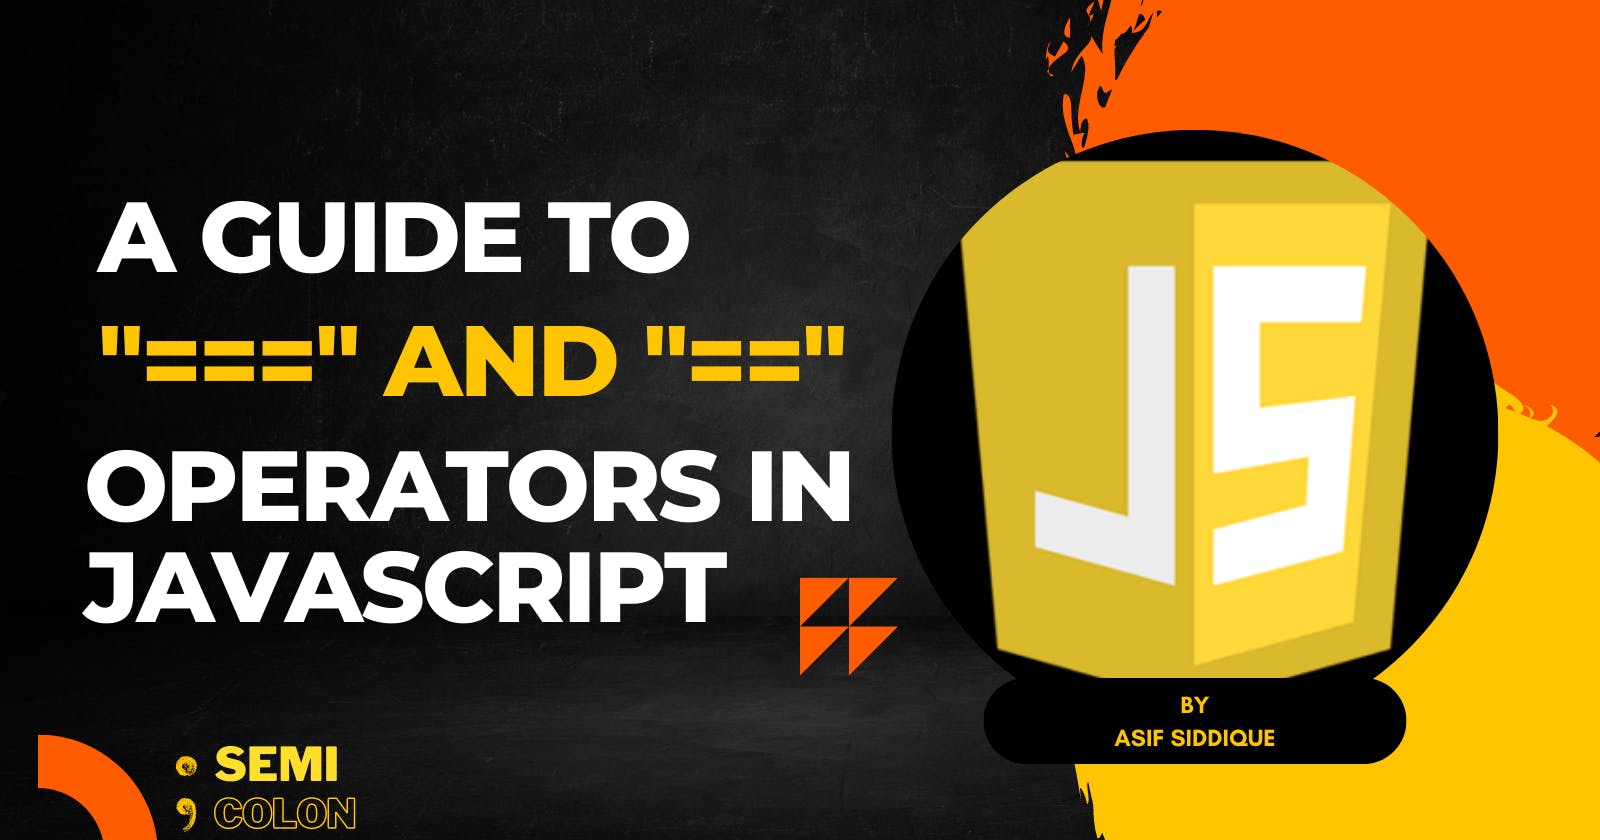 A guide to "===" and "==" operators in JavaScript.